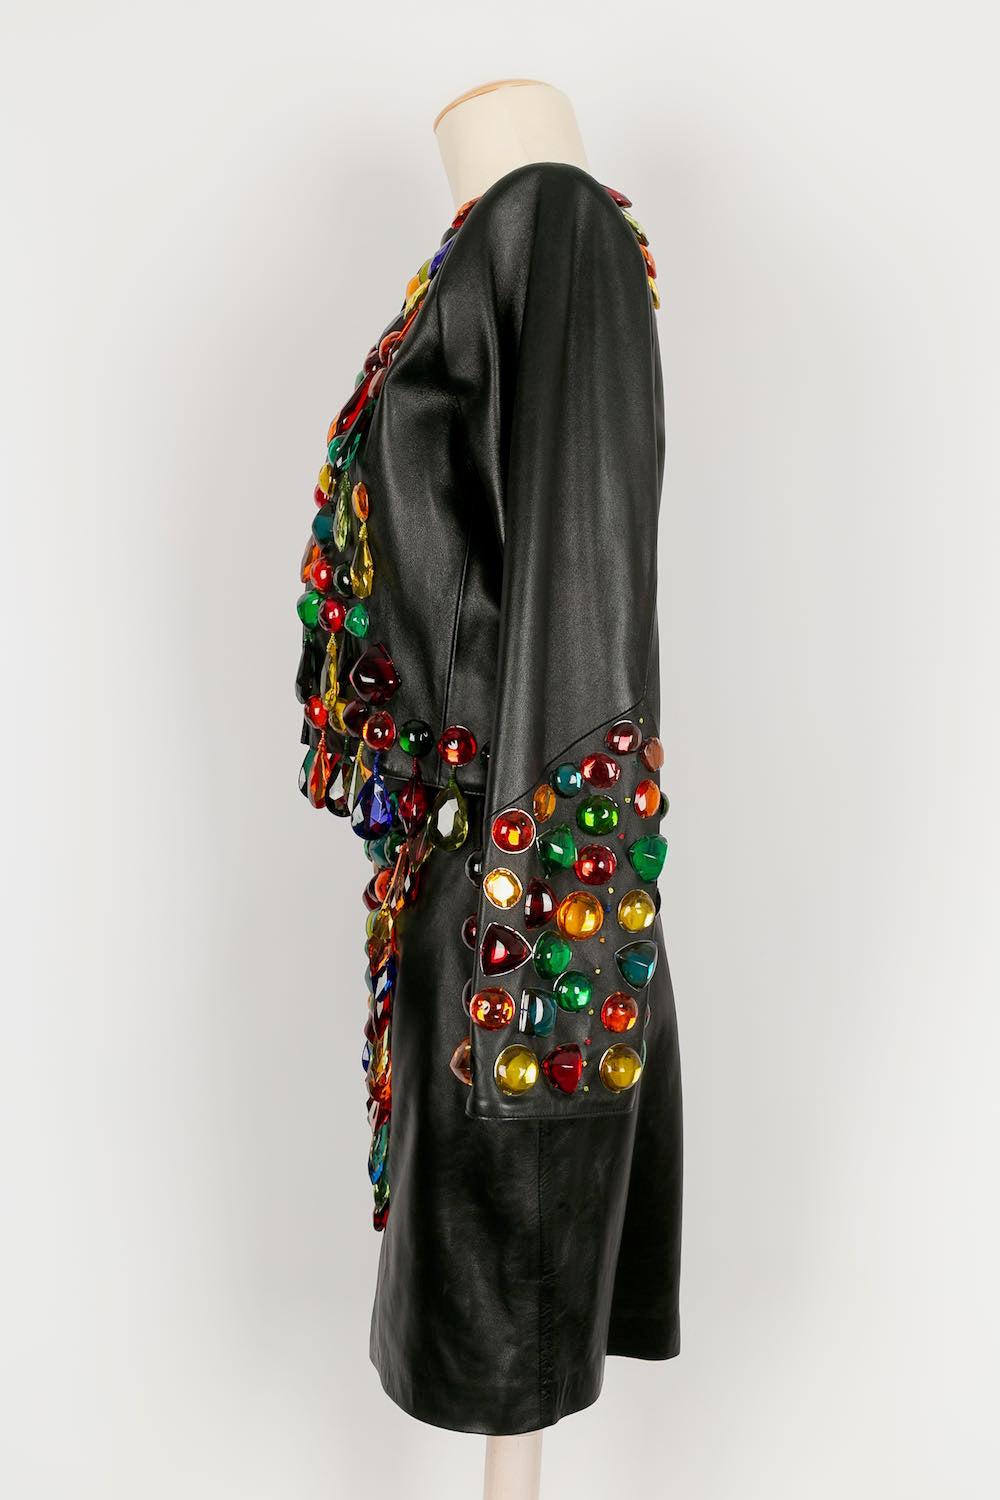 Black Yves Saint Laurent Leather Suit with Tassels, 1990 For Sale